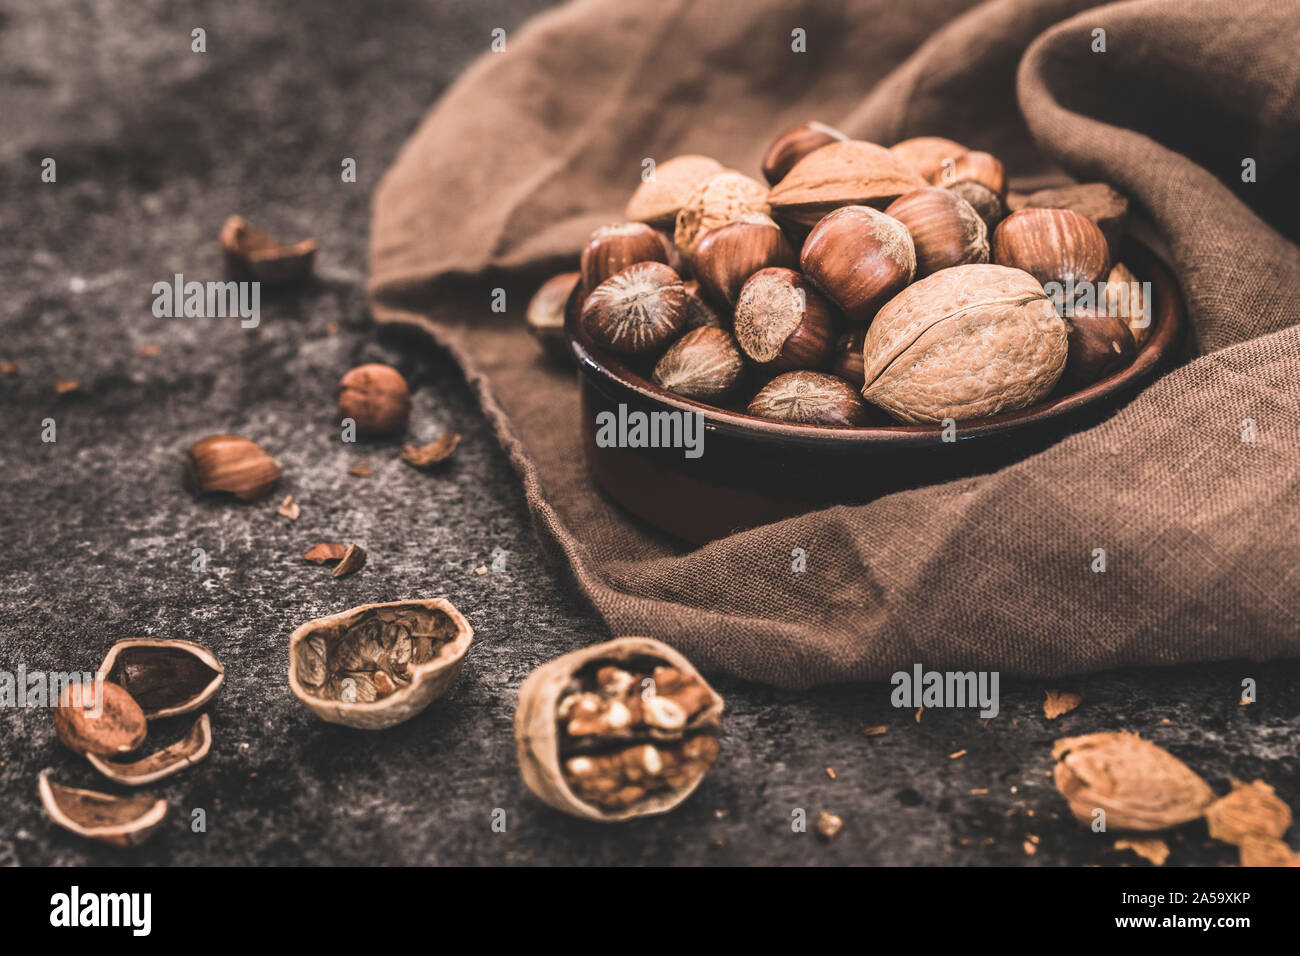 Nuts still life close-up. A small brown bowl with a selection of whole nuts - walnuts, hazelnuts, Brazil nuts and almonds. The nuts are on a dark ston Stock Photo